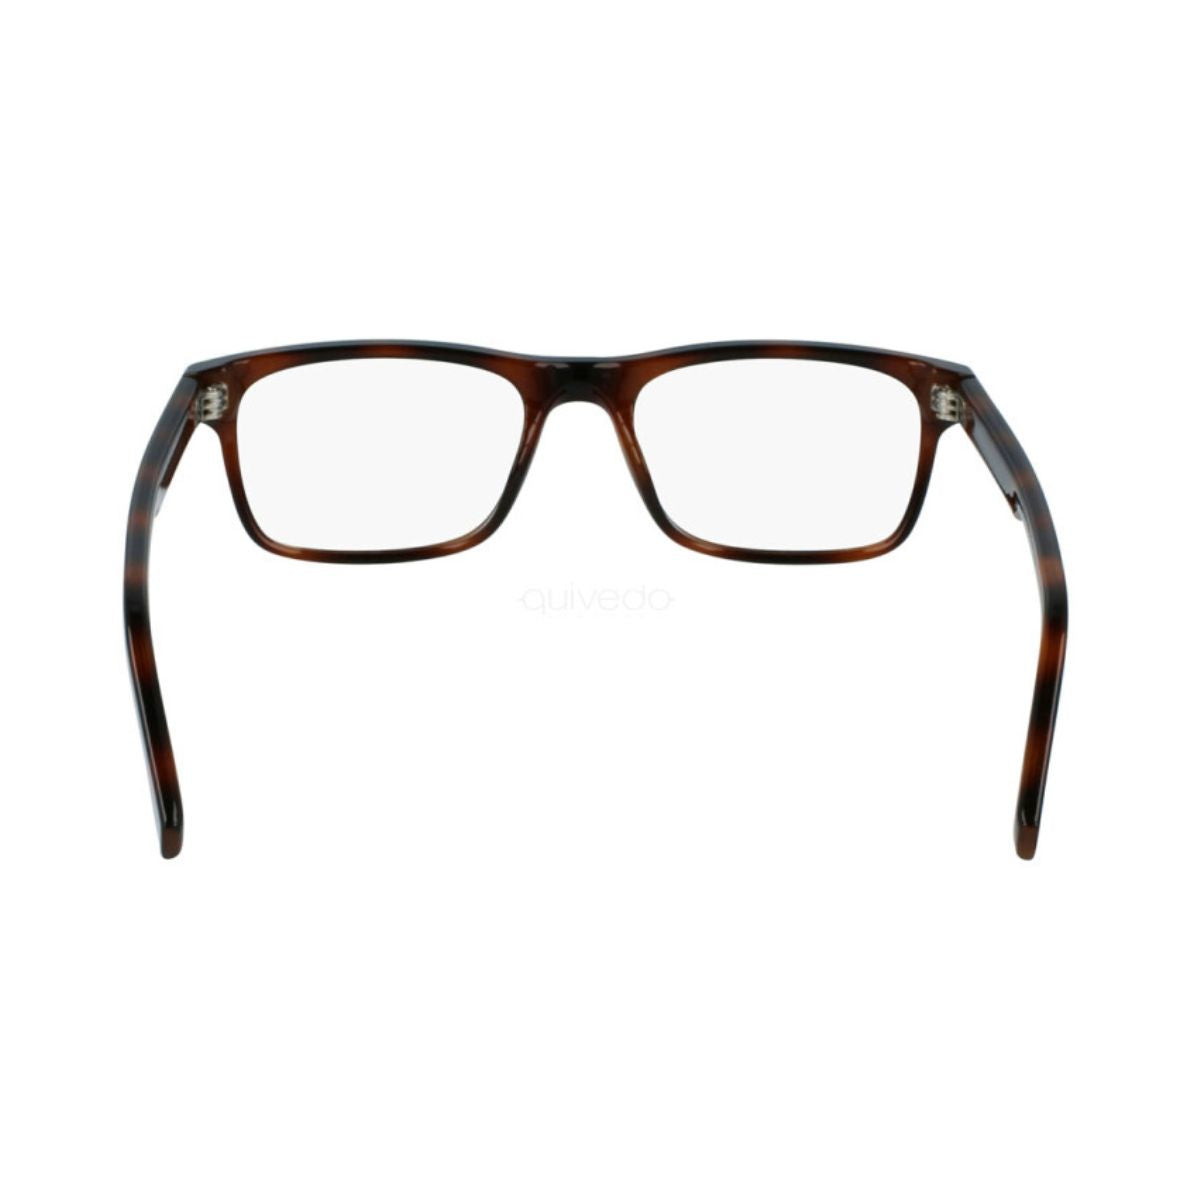 "Lacoste 2886 230 online glasses frame for men and women at optorium"